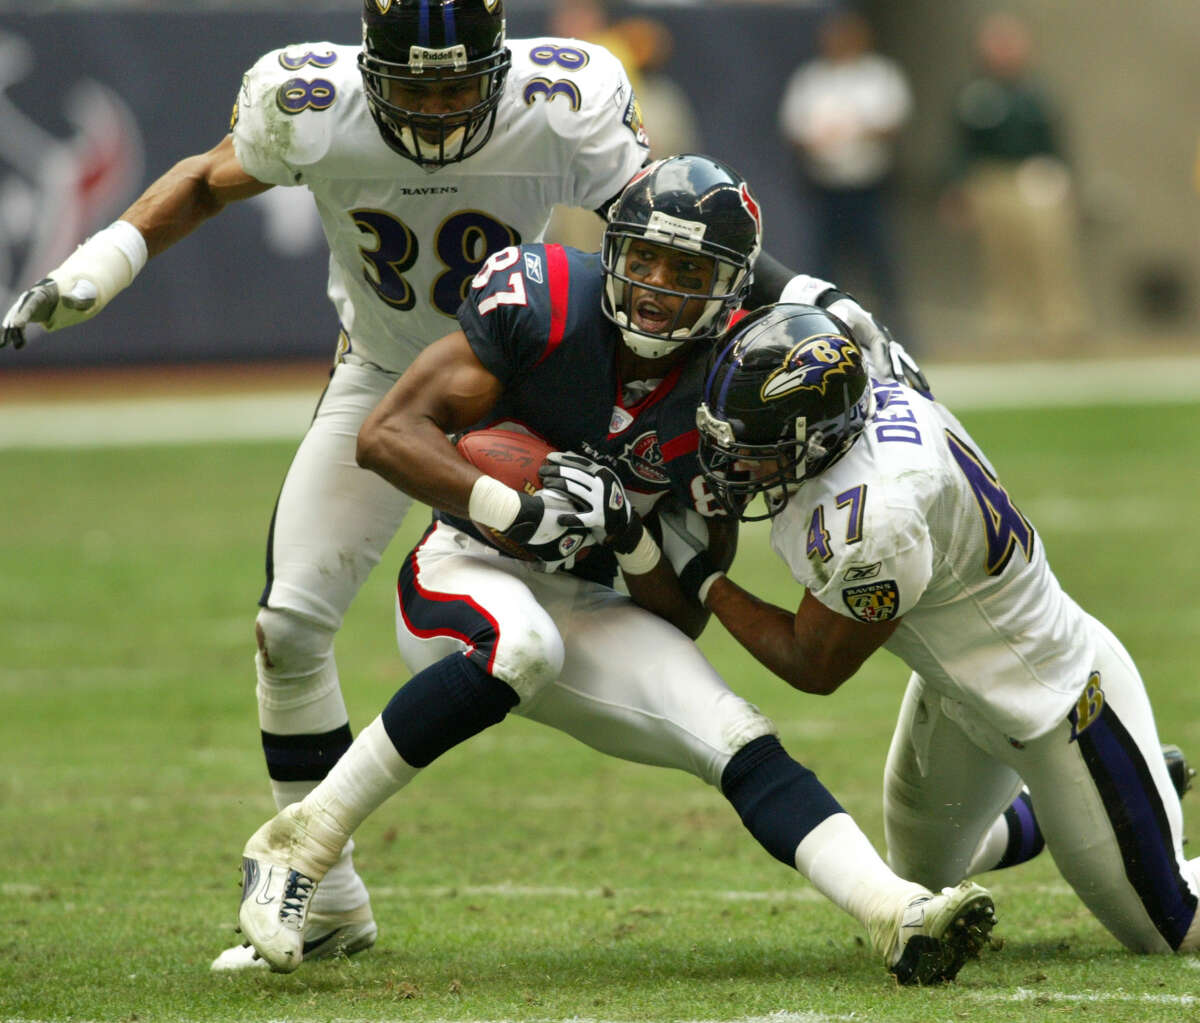 12/15/02--Baltimore Ravens safety Will Demps (#47) stops Houston Texans wide receiver JaJuan Dawson (#87) as Baltimore Ravens corner back James Trapp (#38) closes in during fourth quarter action Sunday afternoon, Dec. 15, 2002, at Reliant Stadium in Houston. The Ravens defeated the Texans 23-19. (digital photo by Kevin Fujii/Chronicle)